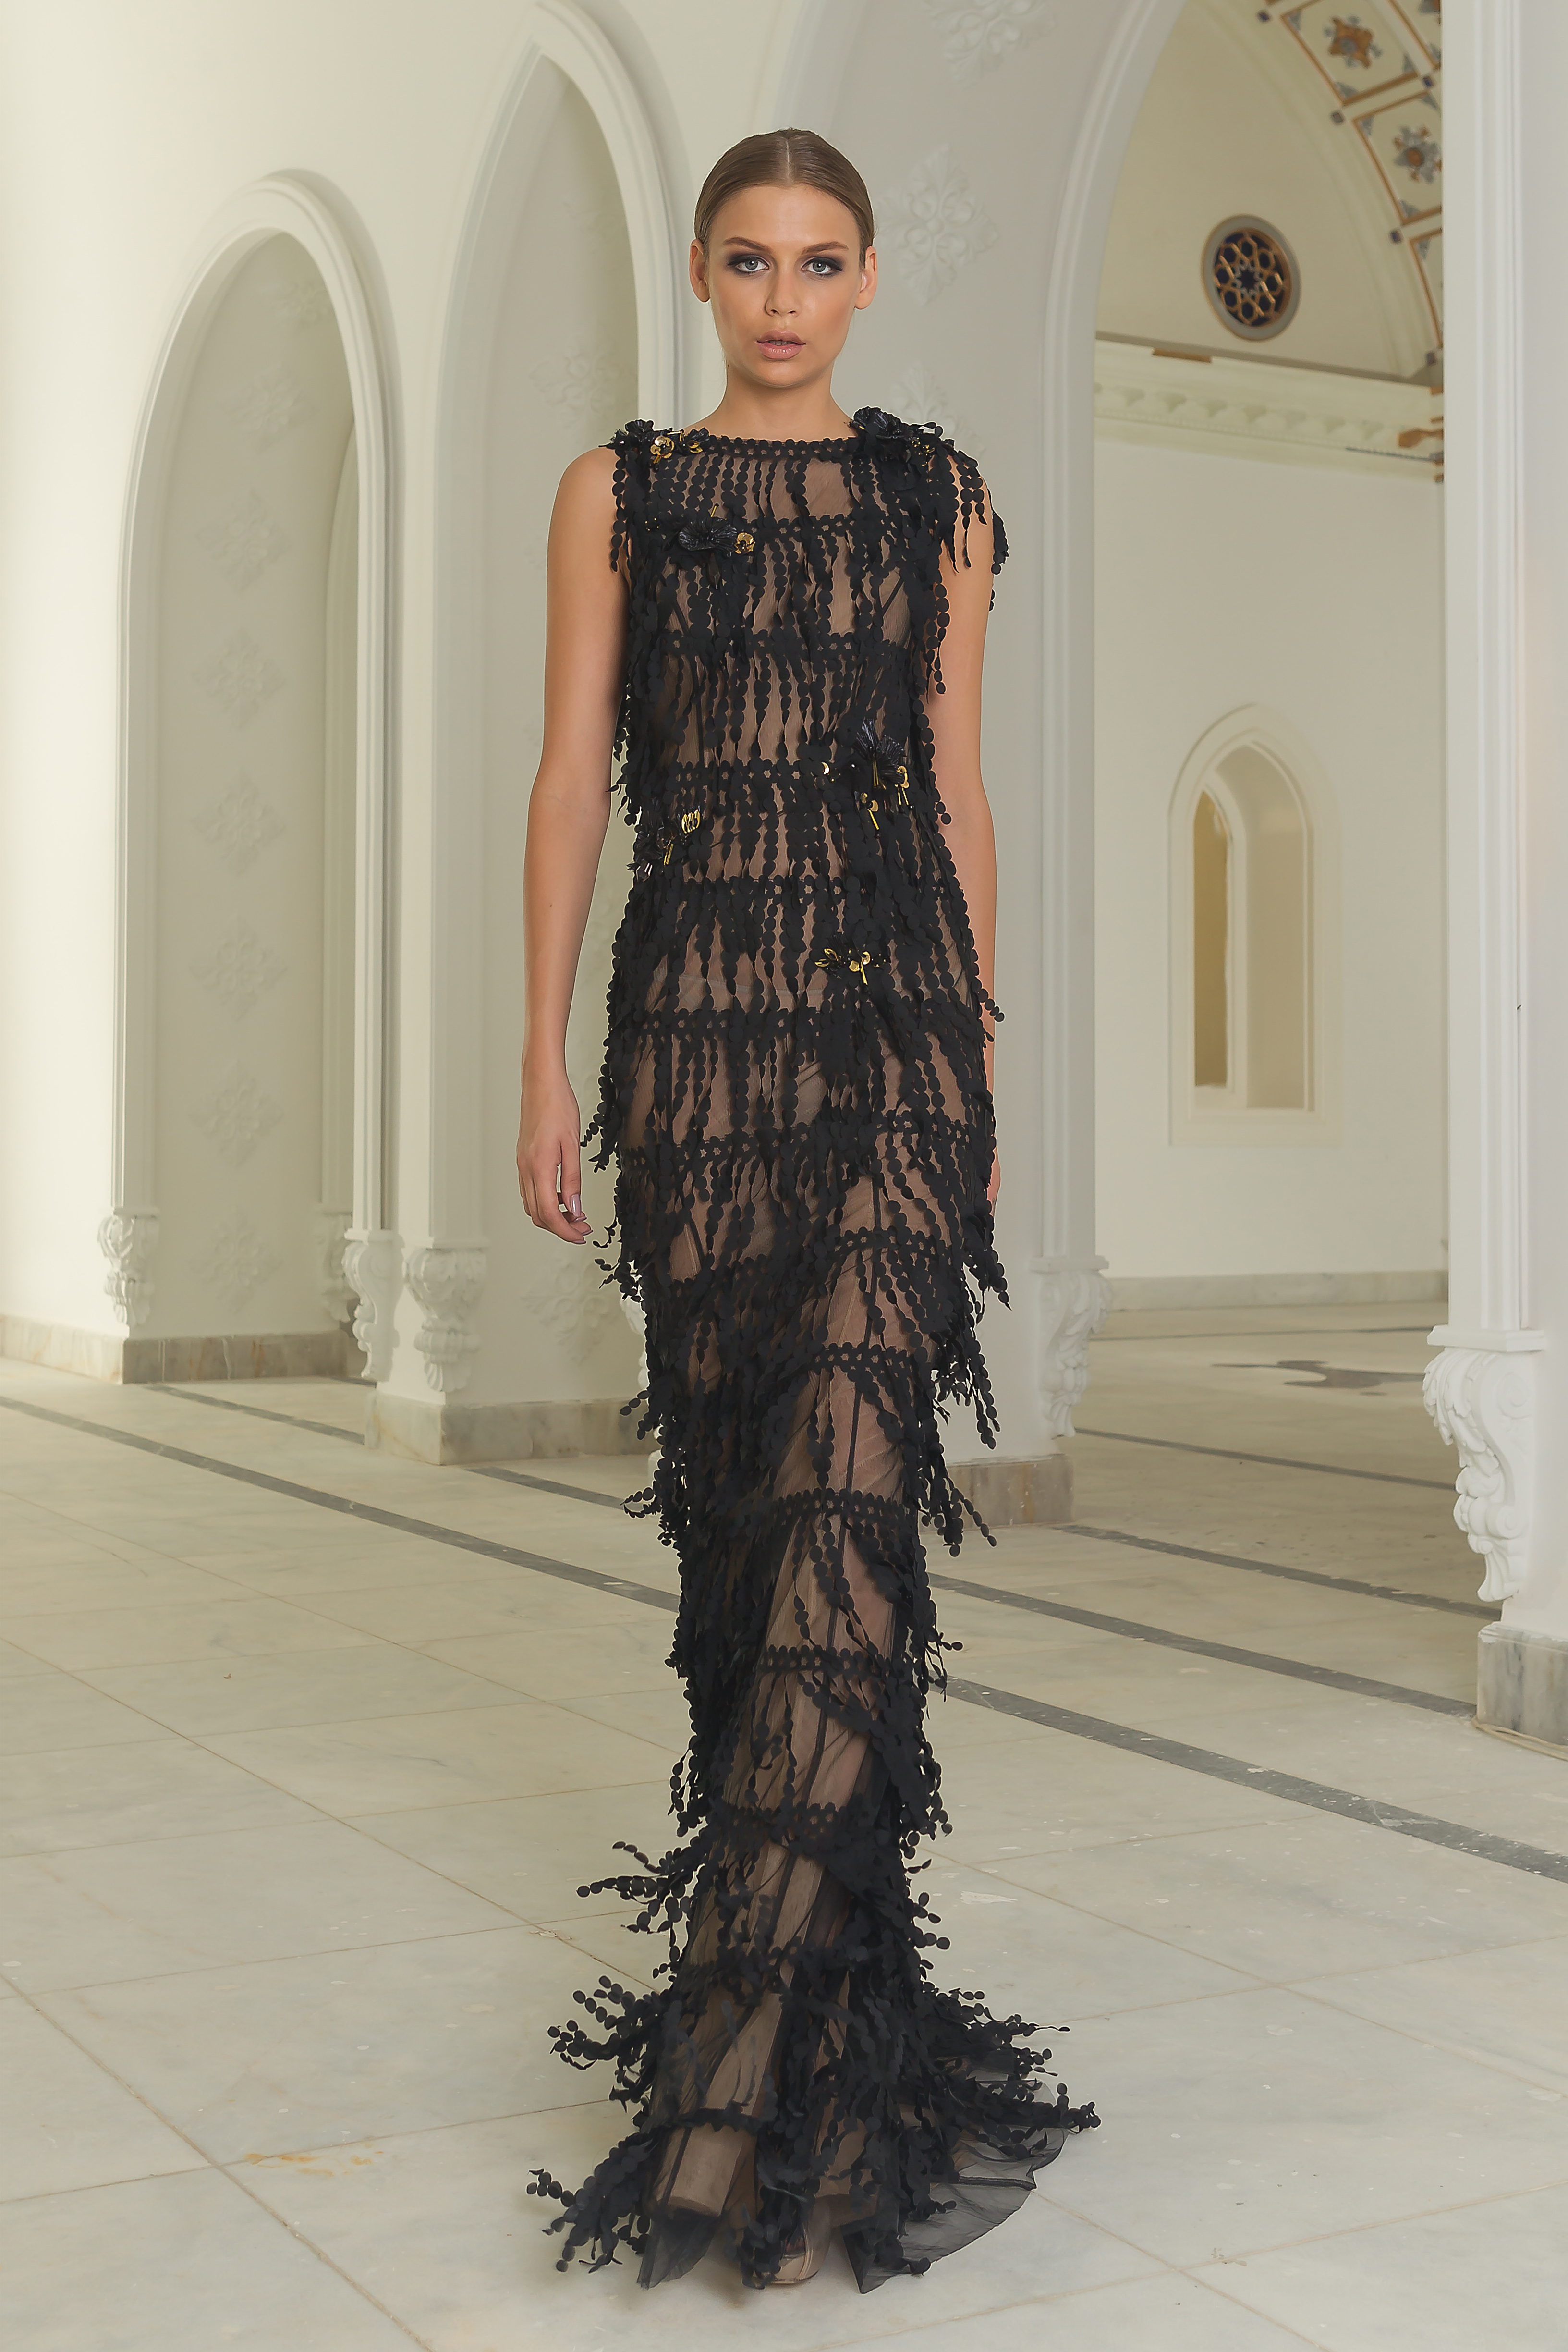 Abed Mahfouz Fall Winter 2014 2015 Haute Couture Collection